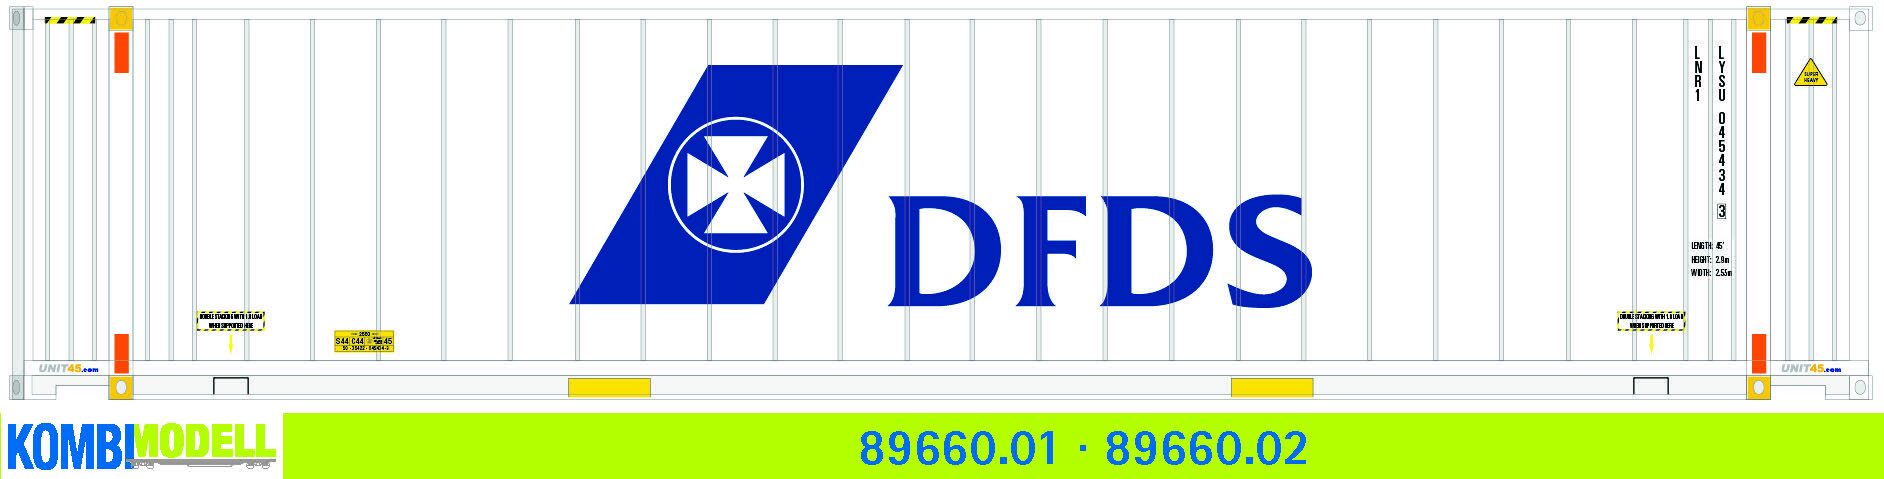 Kombimodell 89660.01 WB-A Ct 45` Reefer DFDS altes Logo  SoSe 